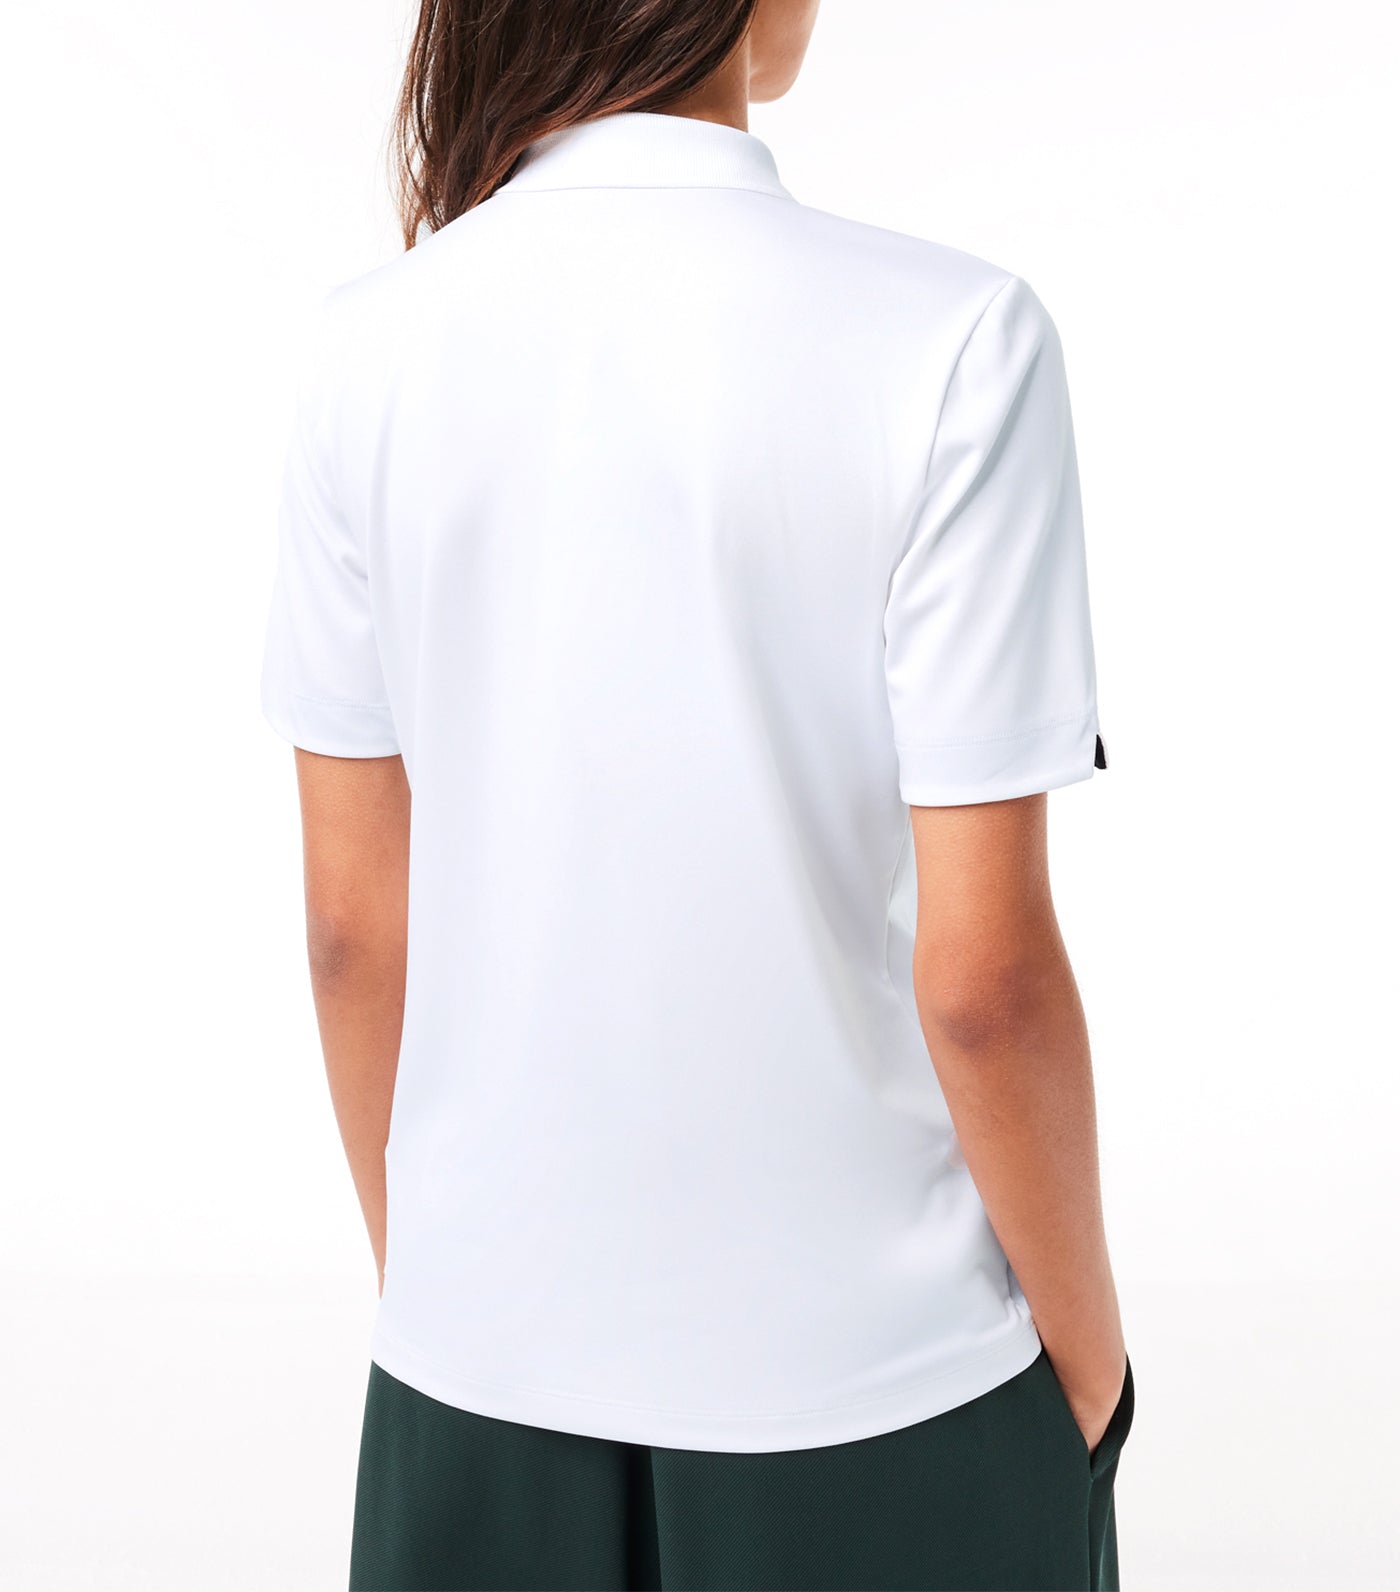 Women's SPORT Breathable Stretch Golf Polo Shirt White/Navy Blue